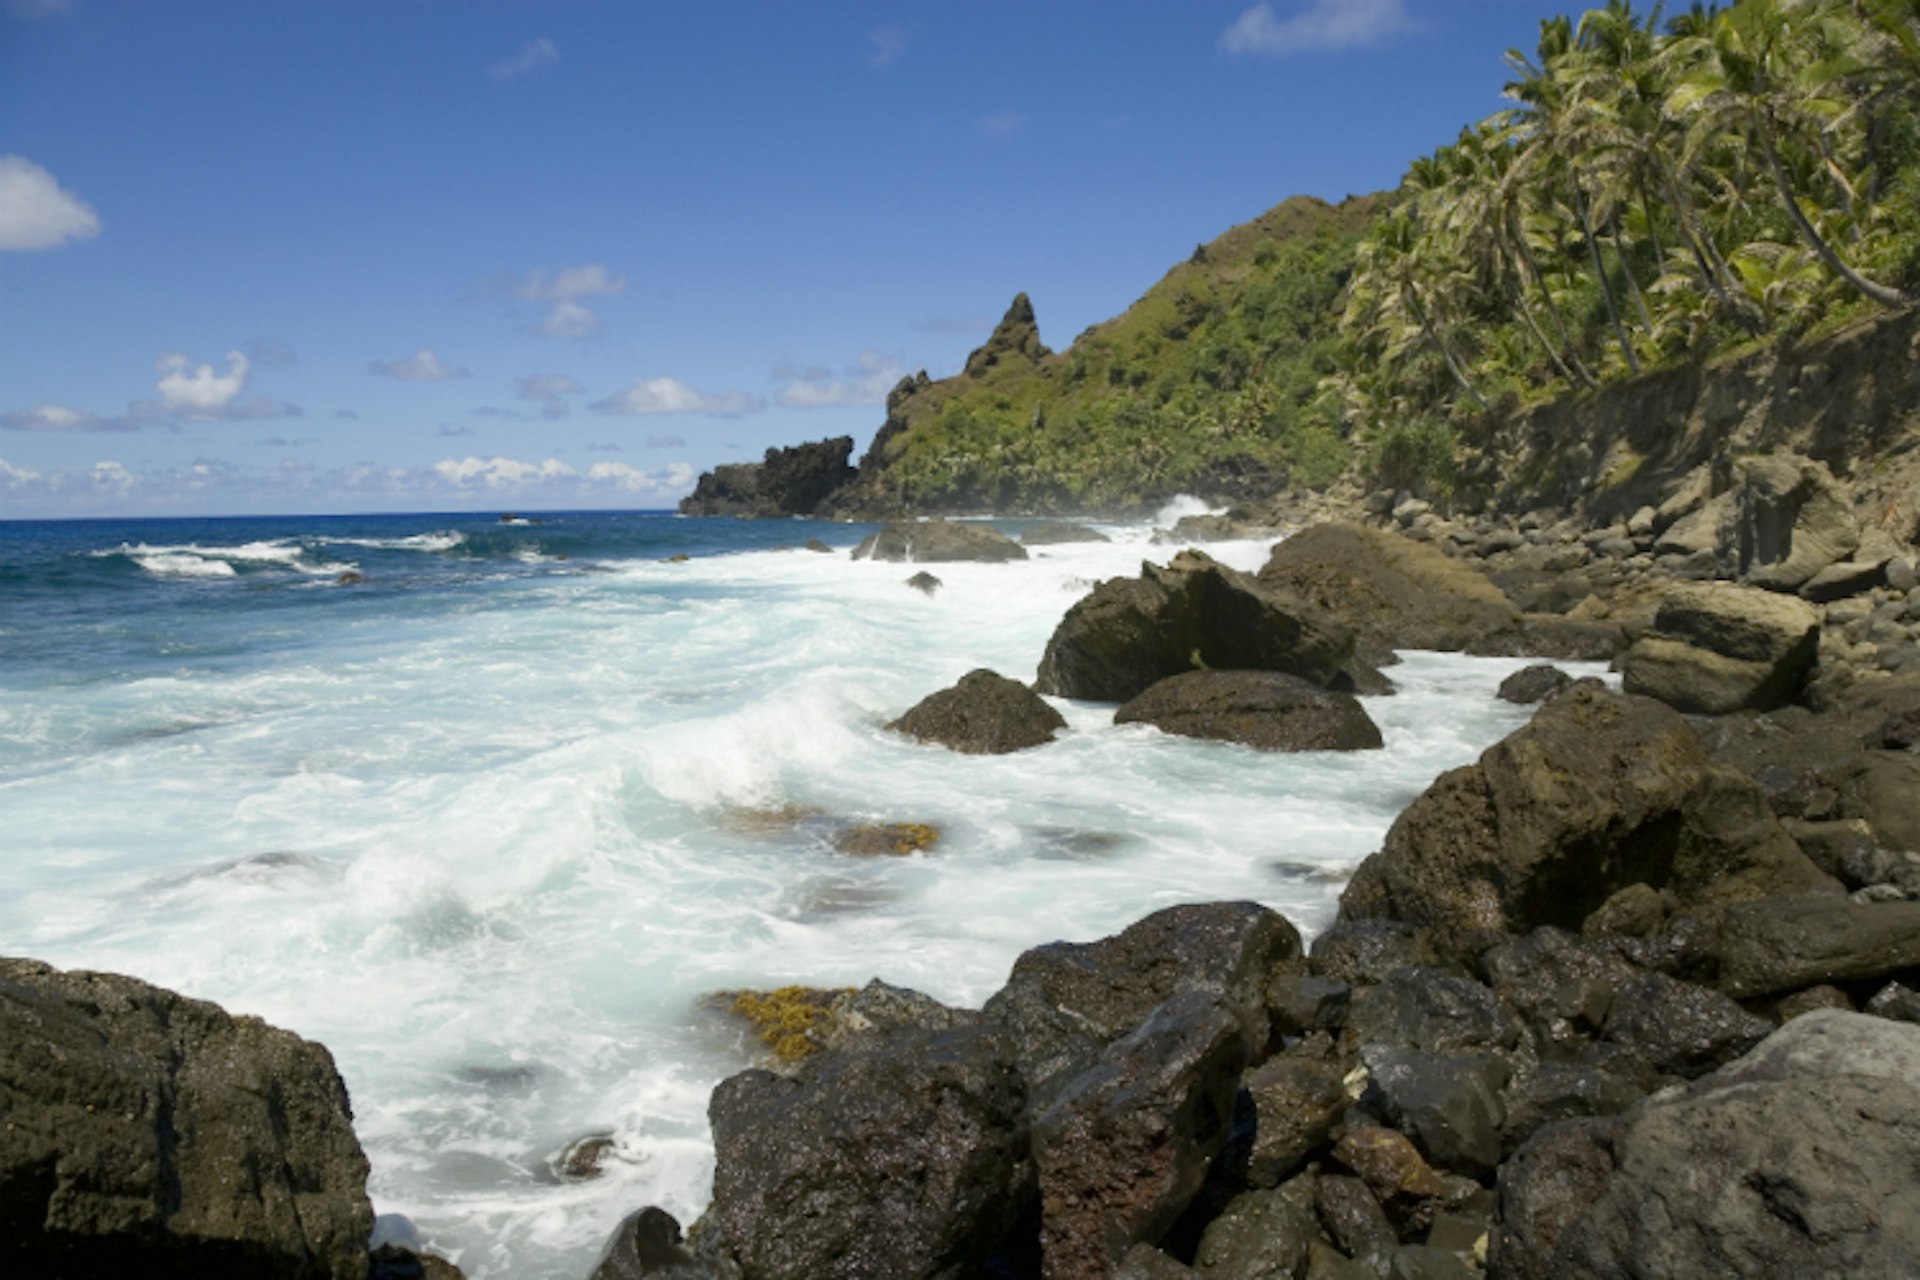 Stranded in the South Pacific, Pitcairn is an ambitious choice of destination. Image by Michael Dunning / Photographer's Choice / Getty Images